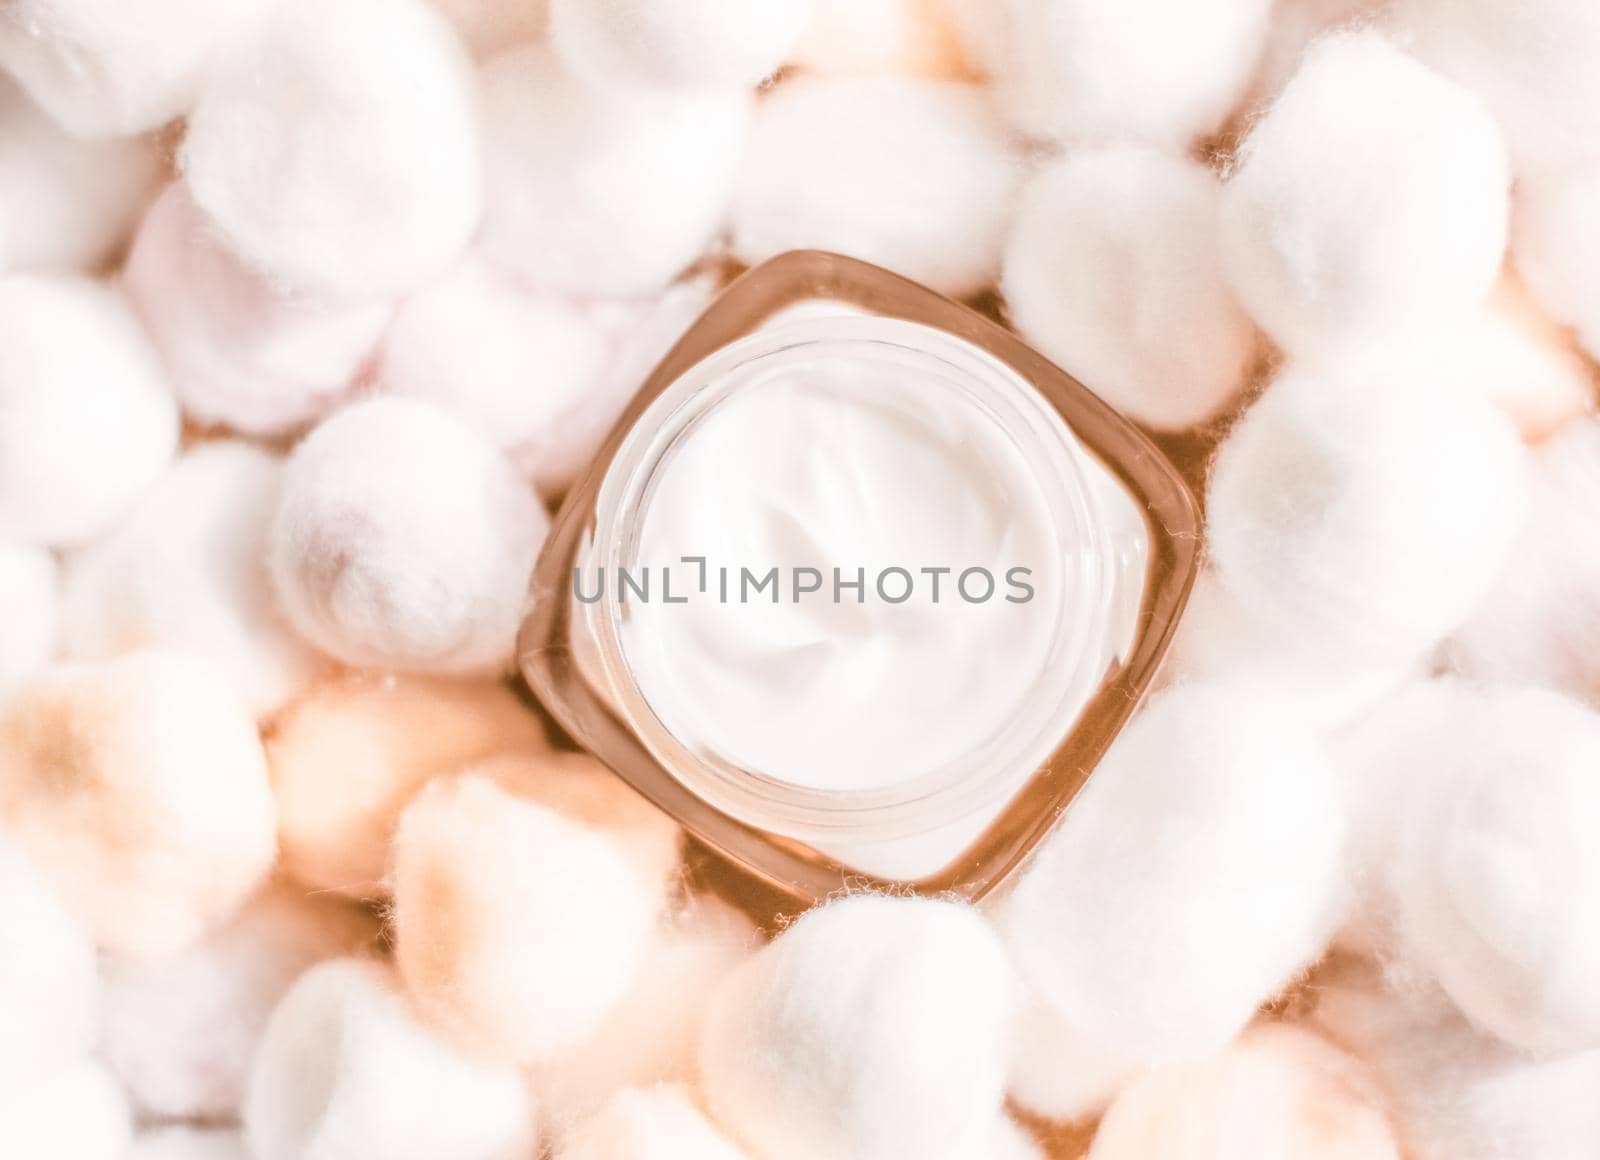 Cosmetic branding, moisturizing emulsion and facial care concept - Luxury face cream for sensitive skin and orange cotton balls on background, spa cosmetics and natural skincare beauty brand product